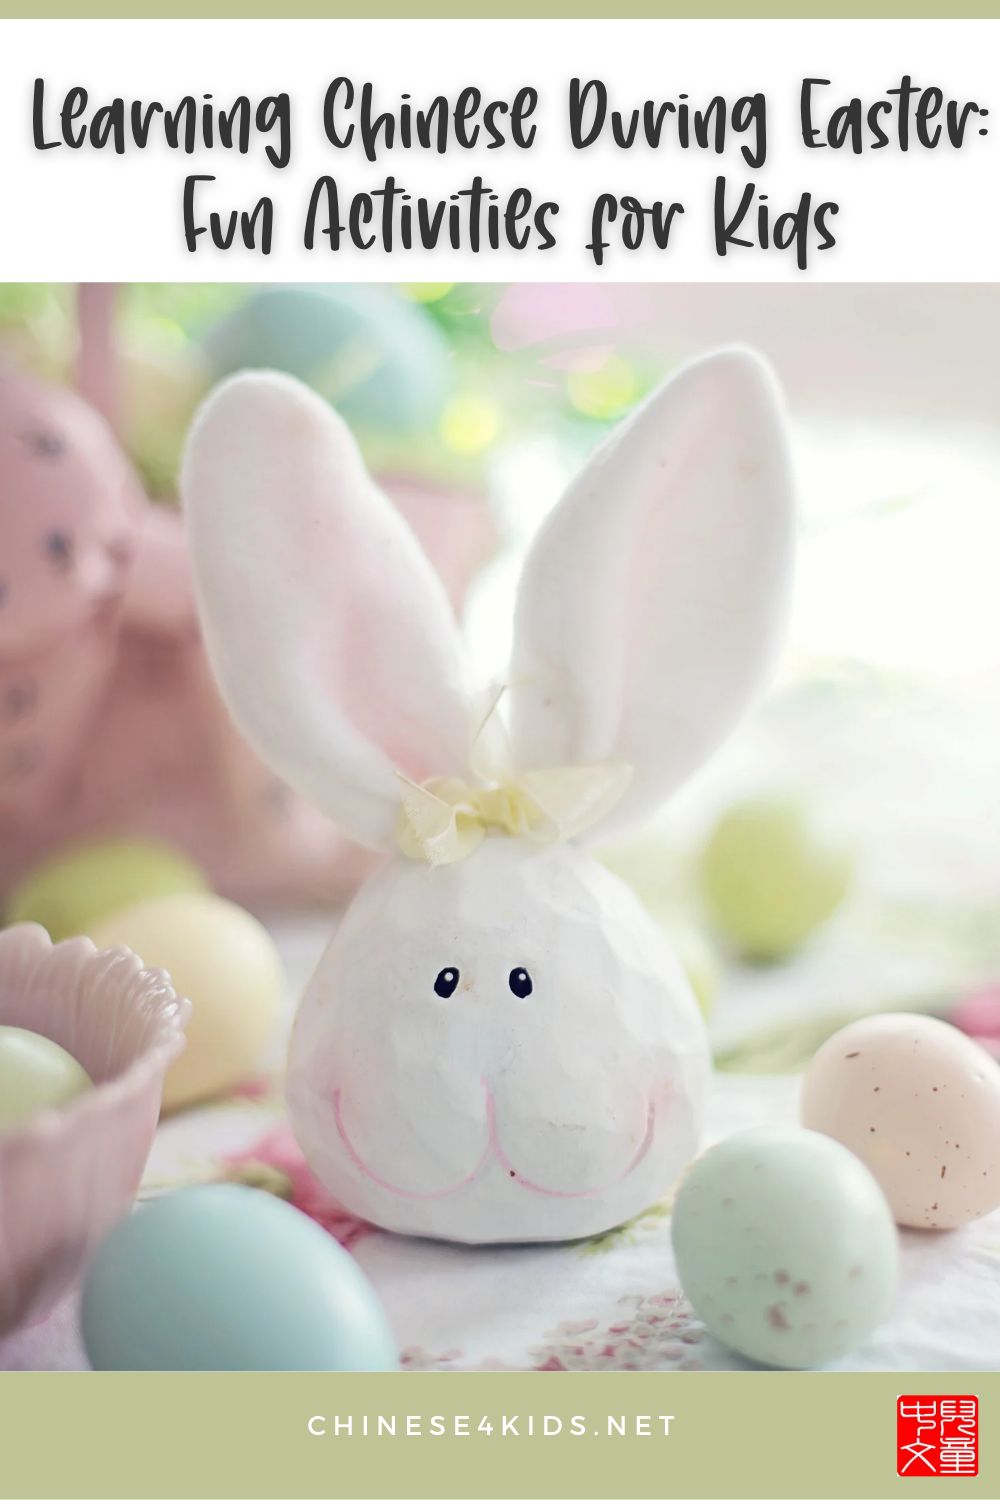 Easter is a wonderful time to celebrate with family and friends, and it can also be a great opportunity to learn Chinese with your kids. Whether you’re spending Easter at home or traveling, here are some fun activities you can do with your kids to improve their Chinese language skills. #EasterChineselearning #LearnChinese #mandarinChinese #Easter #复活节 #Chinese4kids #Chineseforkids